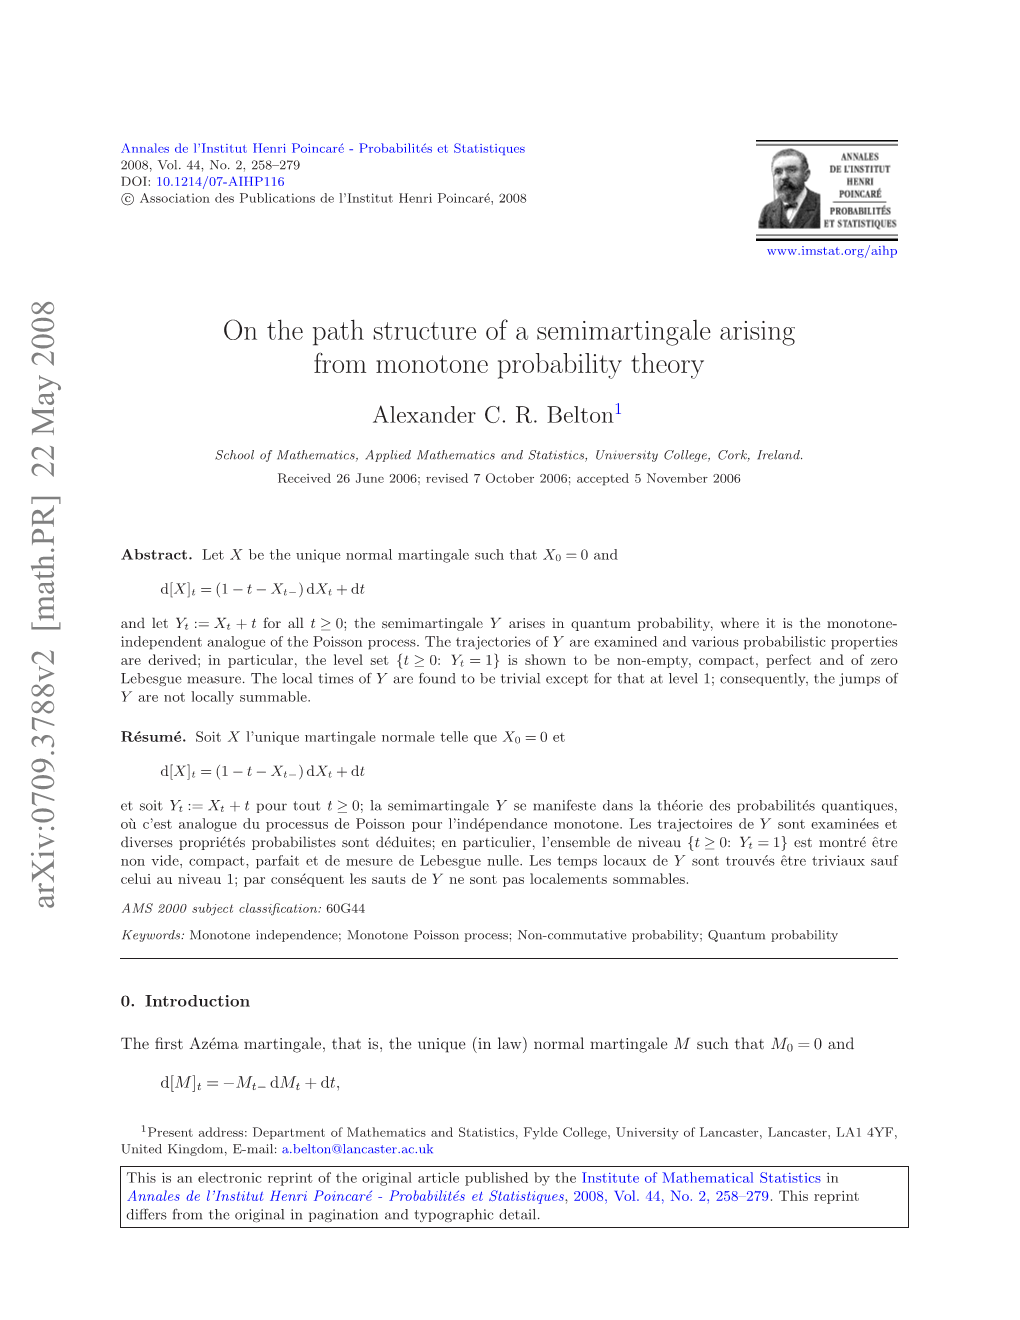 On the Path Structure of a Semimartingale Arisingfrom